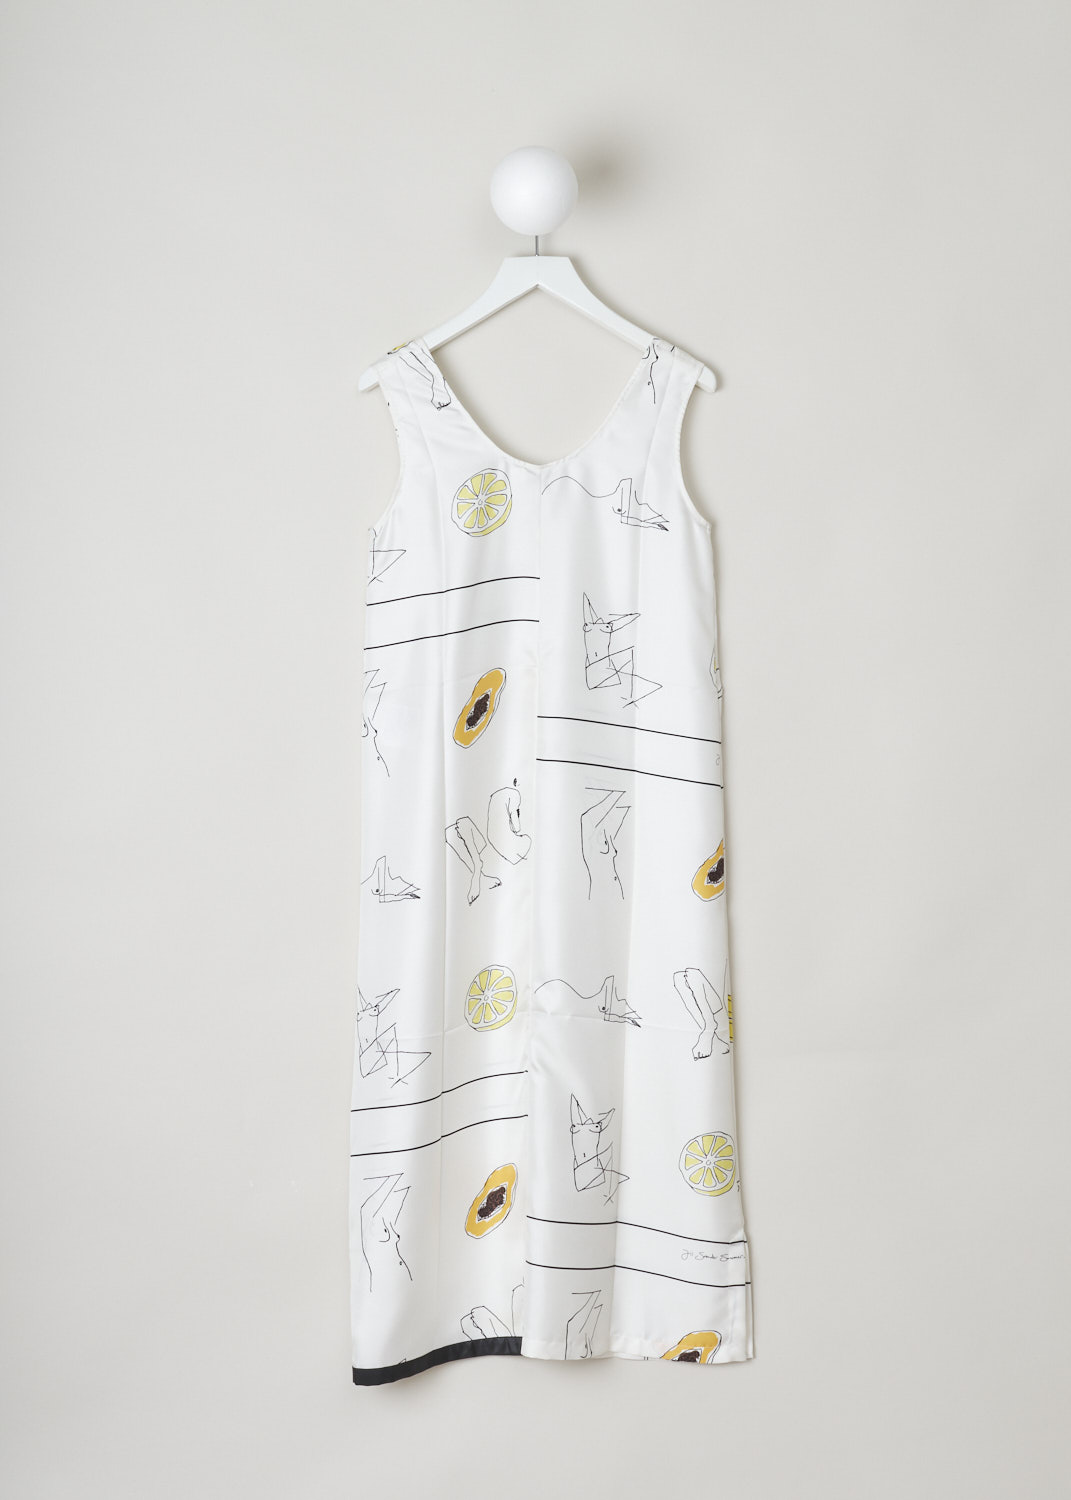 Jill Sander, Off-white maxi shift dress, JSW0508956_W0281266B_127, white, back, Off-white dress featuring a maxi length and comes decorated with multiple abstract drawings. Designed with a round neckline and no sleeves. Small splits can be found on the side seam, and strip of black fabric trims the hem. 